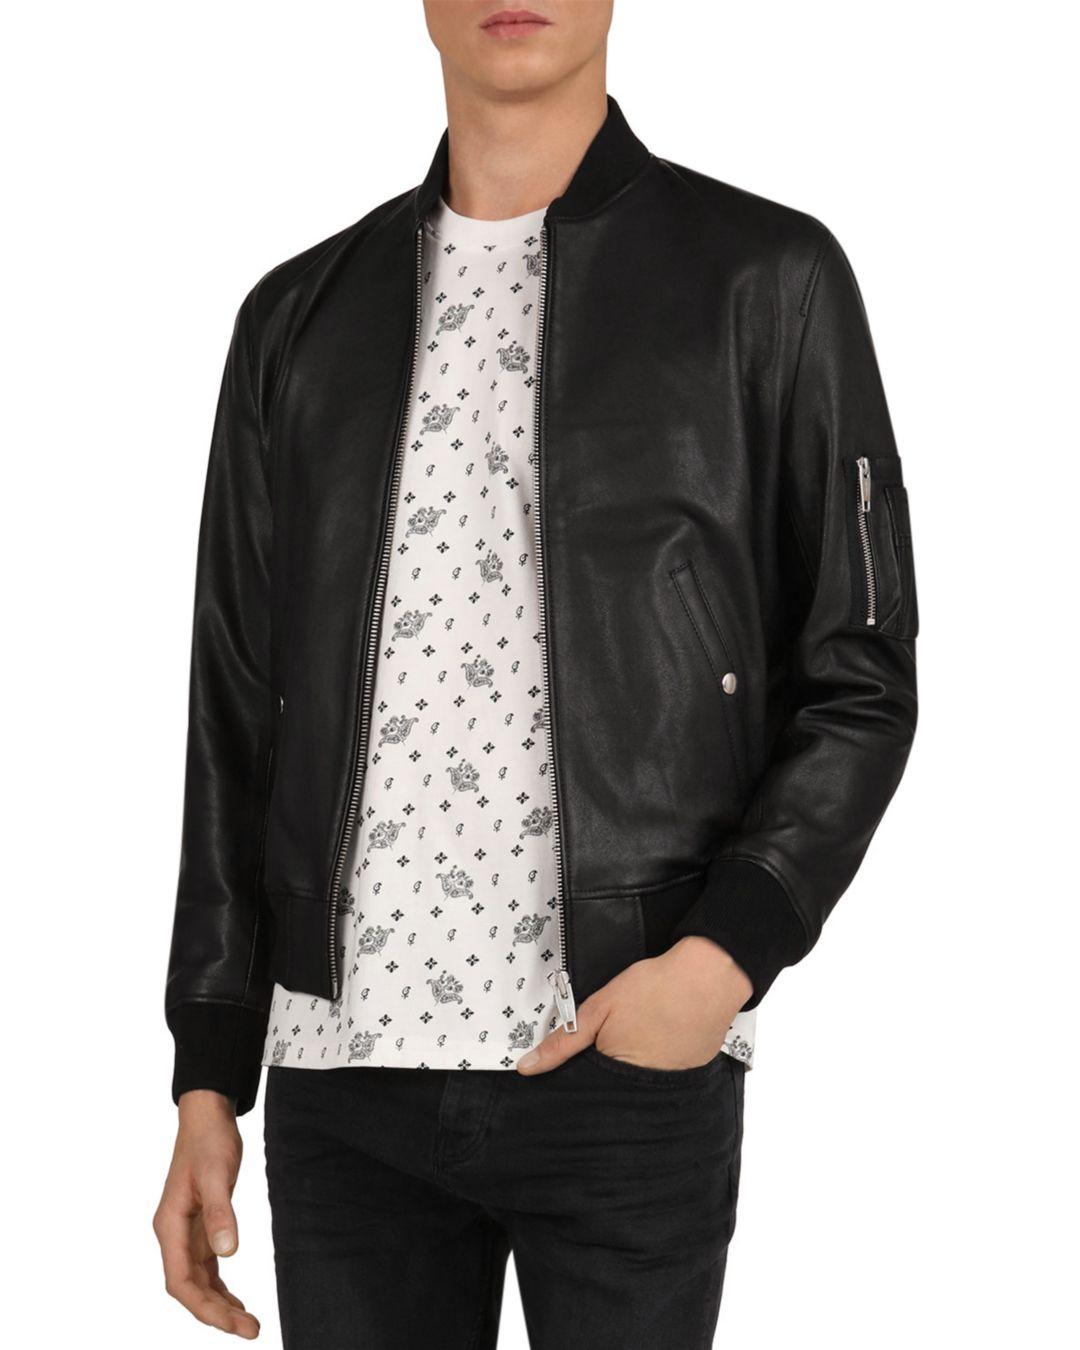 The Kooples California Leather Bomber Jacket in Black for Men - Lyst